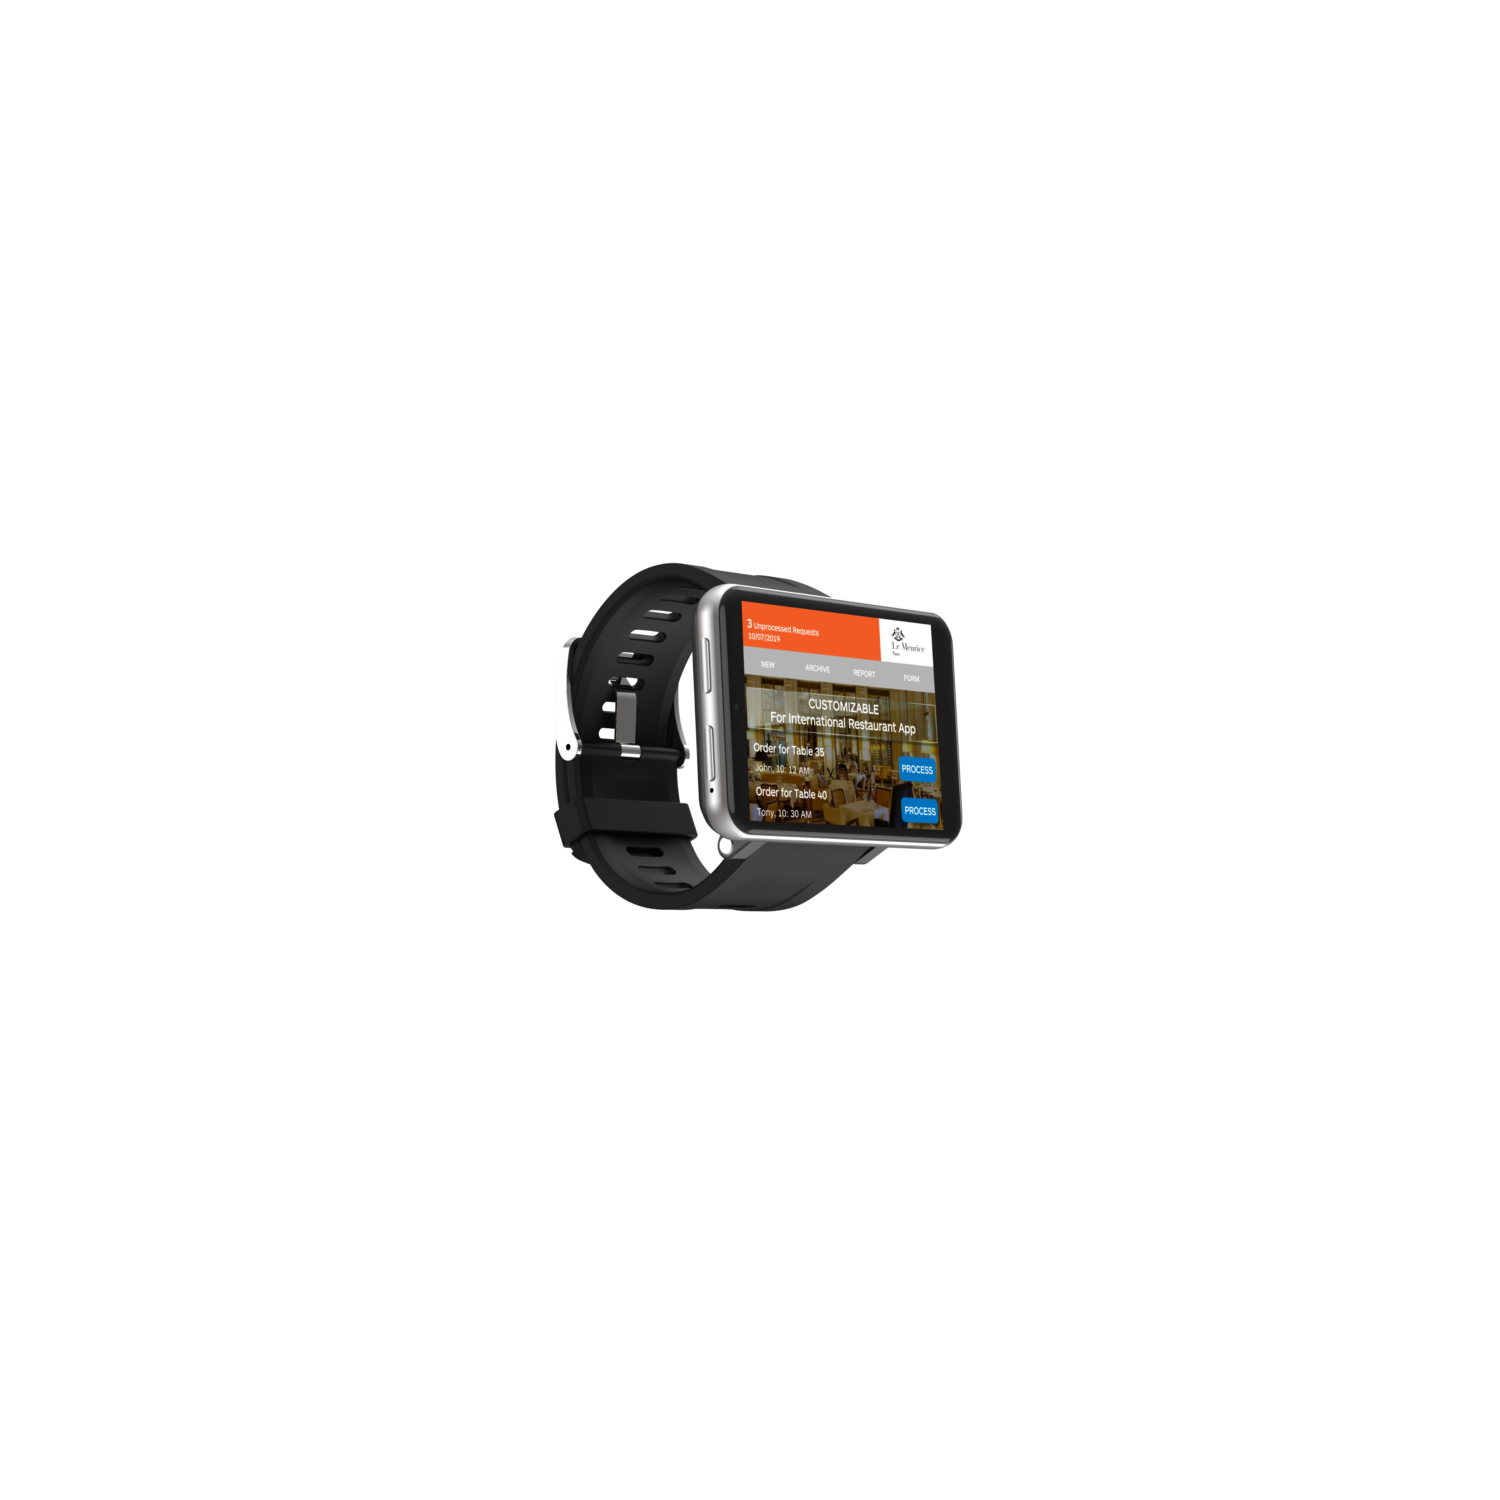 ISPEKTRUM iS100 4G Smartwatch 2.8” Screen 4G LTE Call, WiFi, 5MP Camera, Long Battery Life, GPS, Google Maps & Play Store, 1GB+16GB, HR Monitor Multiple Sports Mode Waterproof